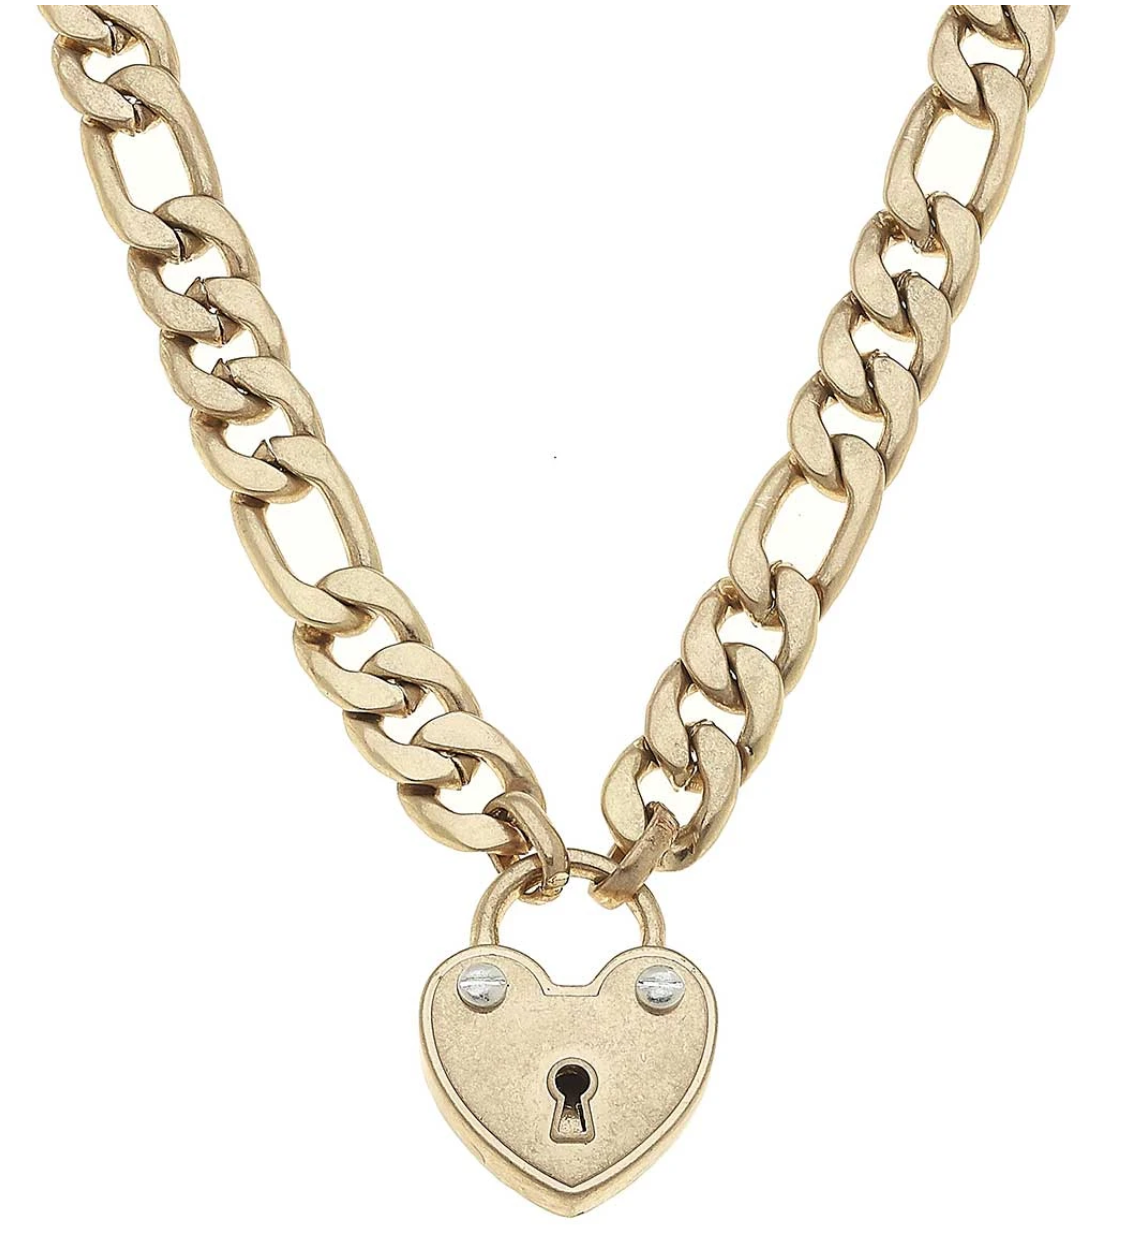 Whitney Padlock Chain Necklace